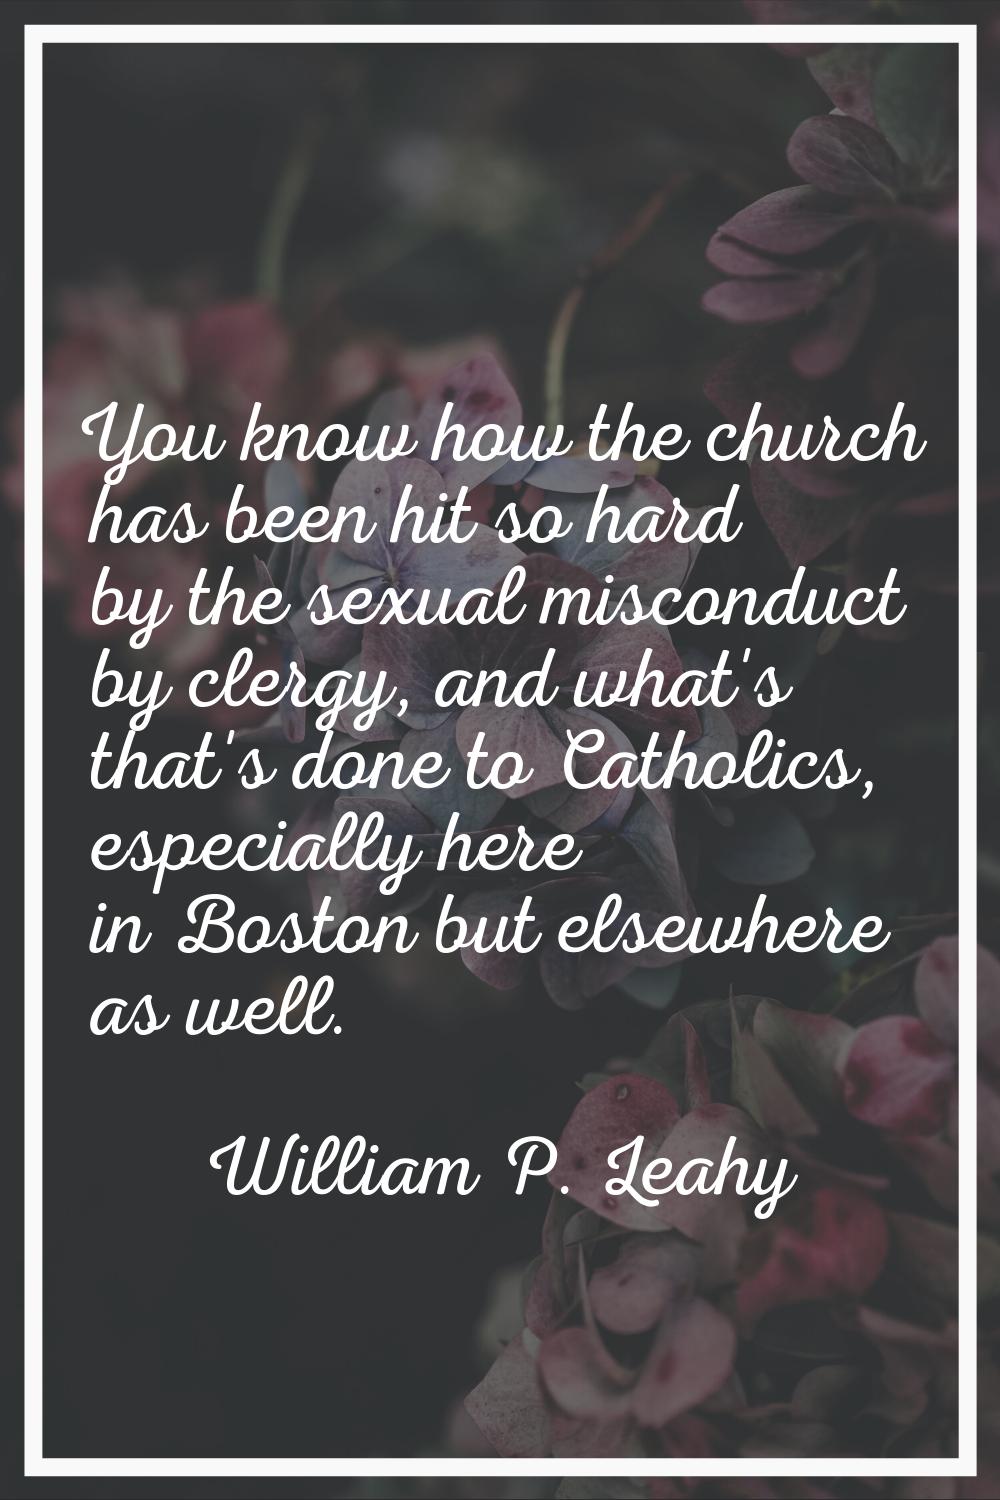 You know how the church has been hit so hard by the sexual misconduct by clergy, and what's that's 